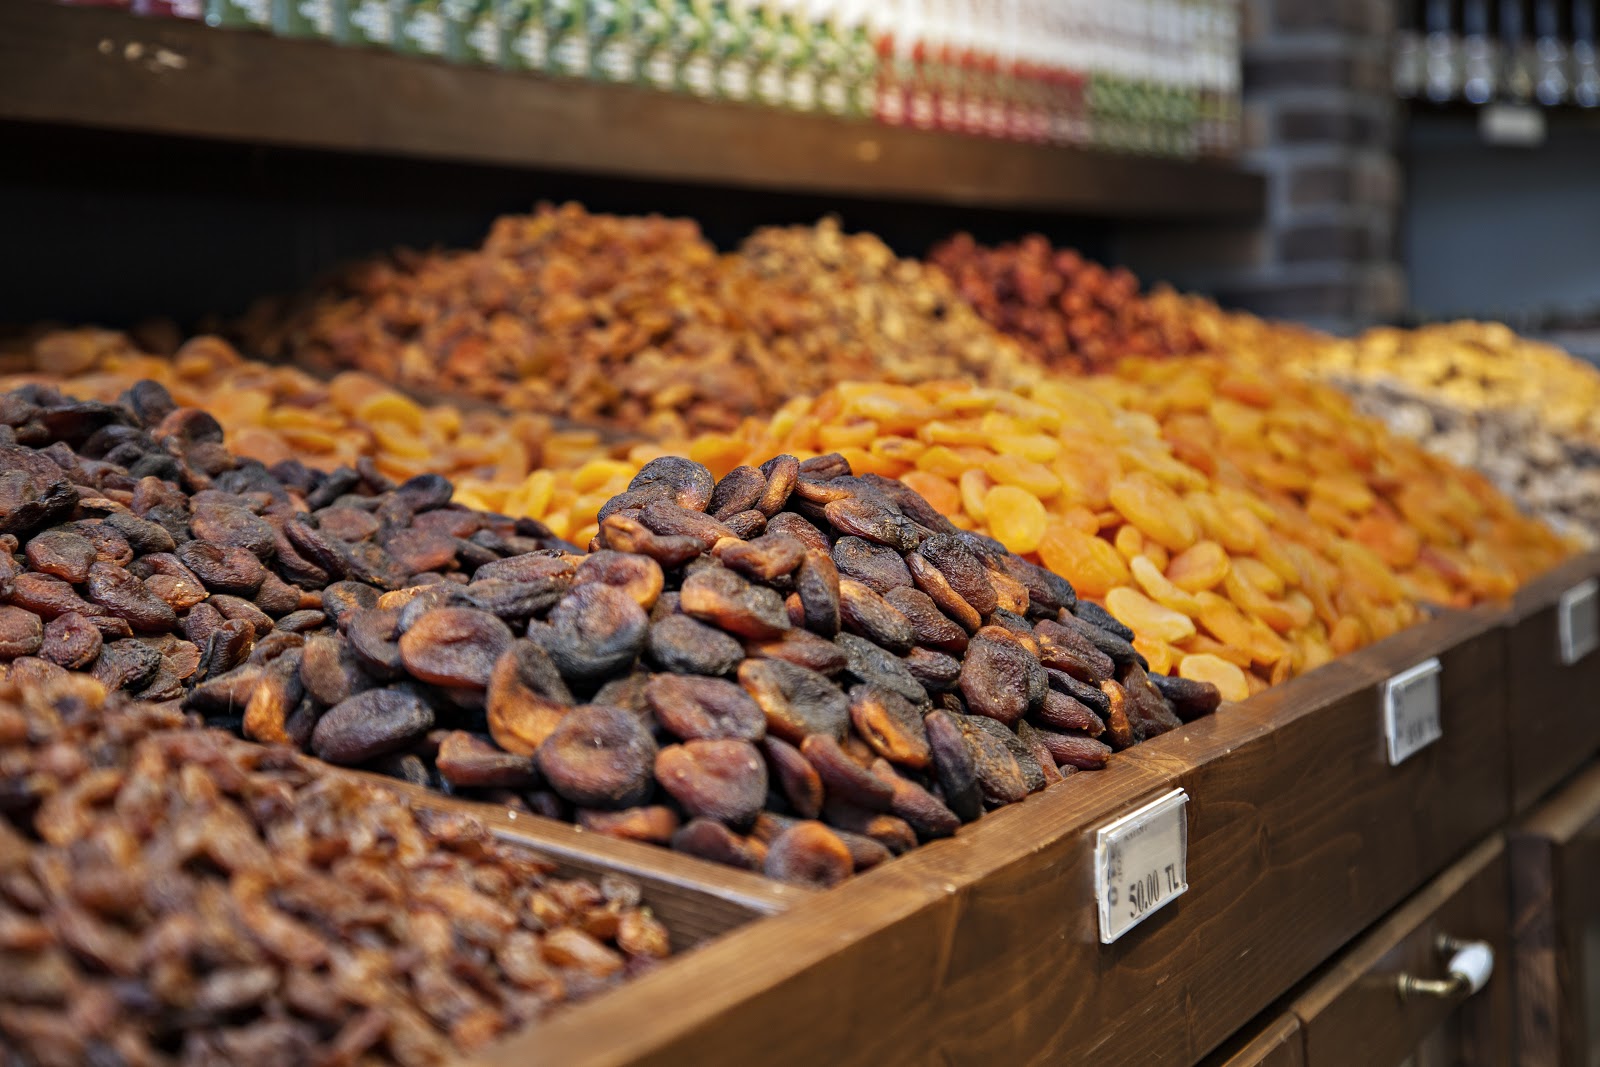 A market stall piled high with varieties of dried fruit including prunes and apricots.